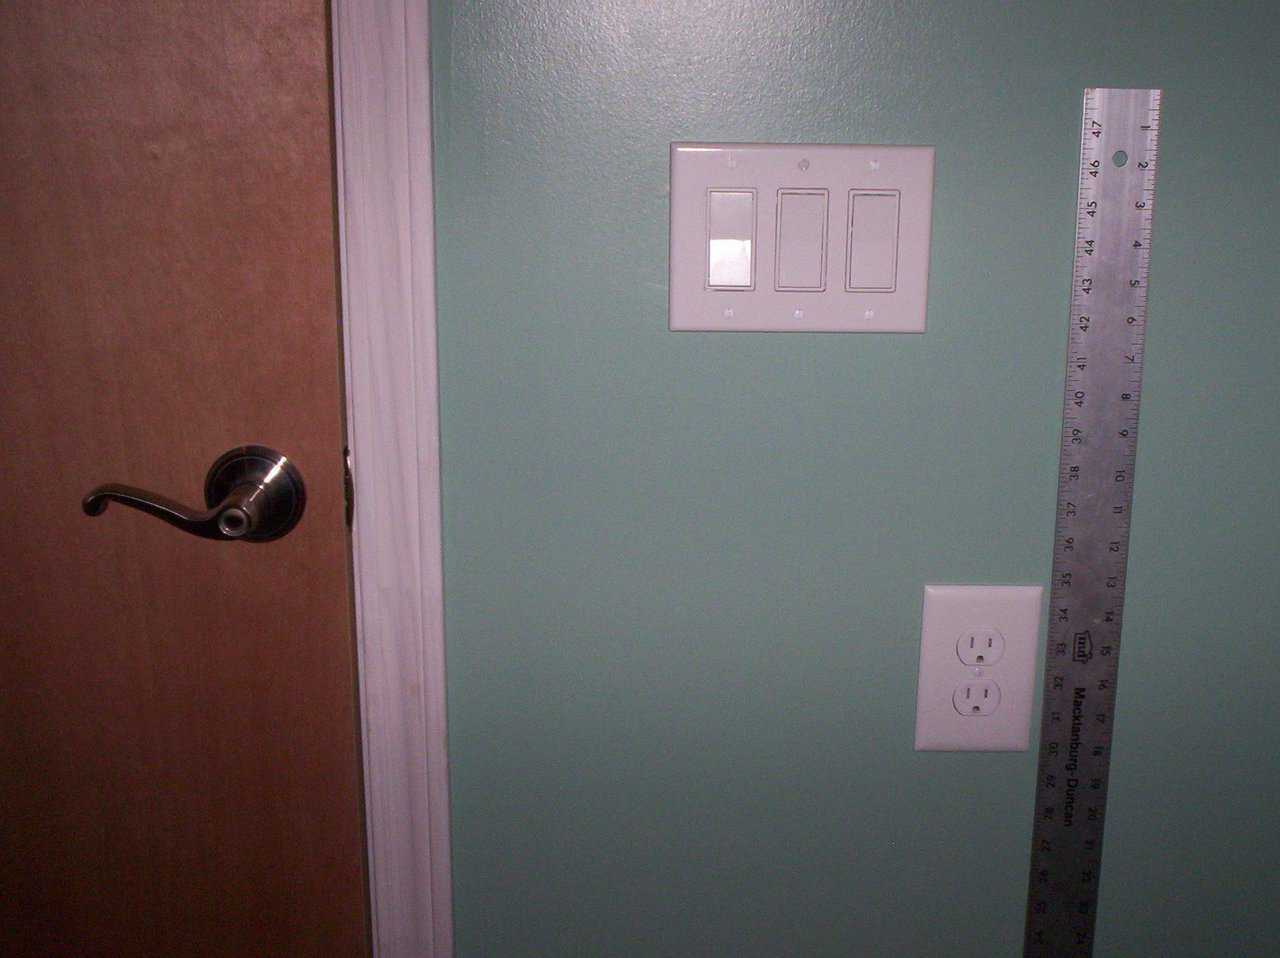 Universal Design Elements — Contrasting colors and trim work, full hand grip door handles, rocker switches on contrasted switch plates and wall receptacles 30" off the floor can be easily seen and manipulated.